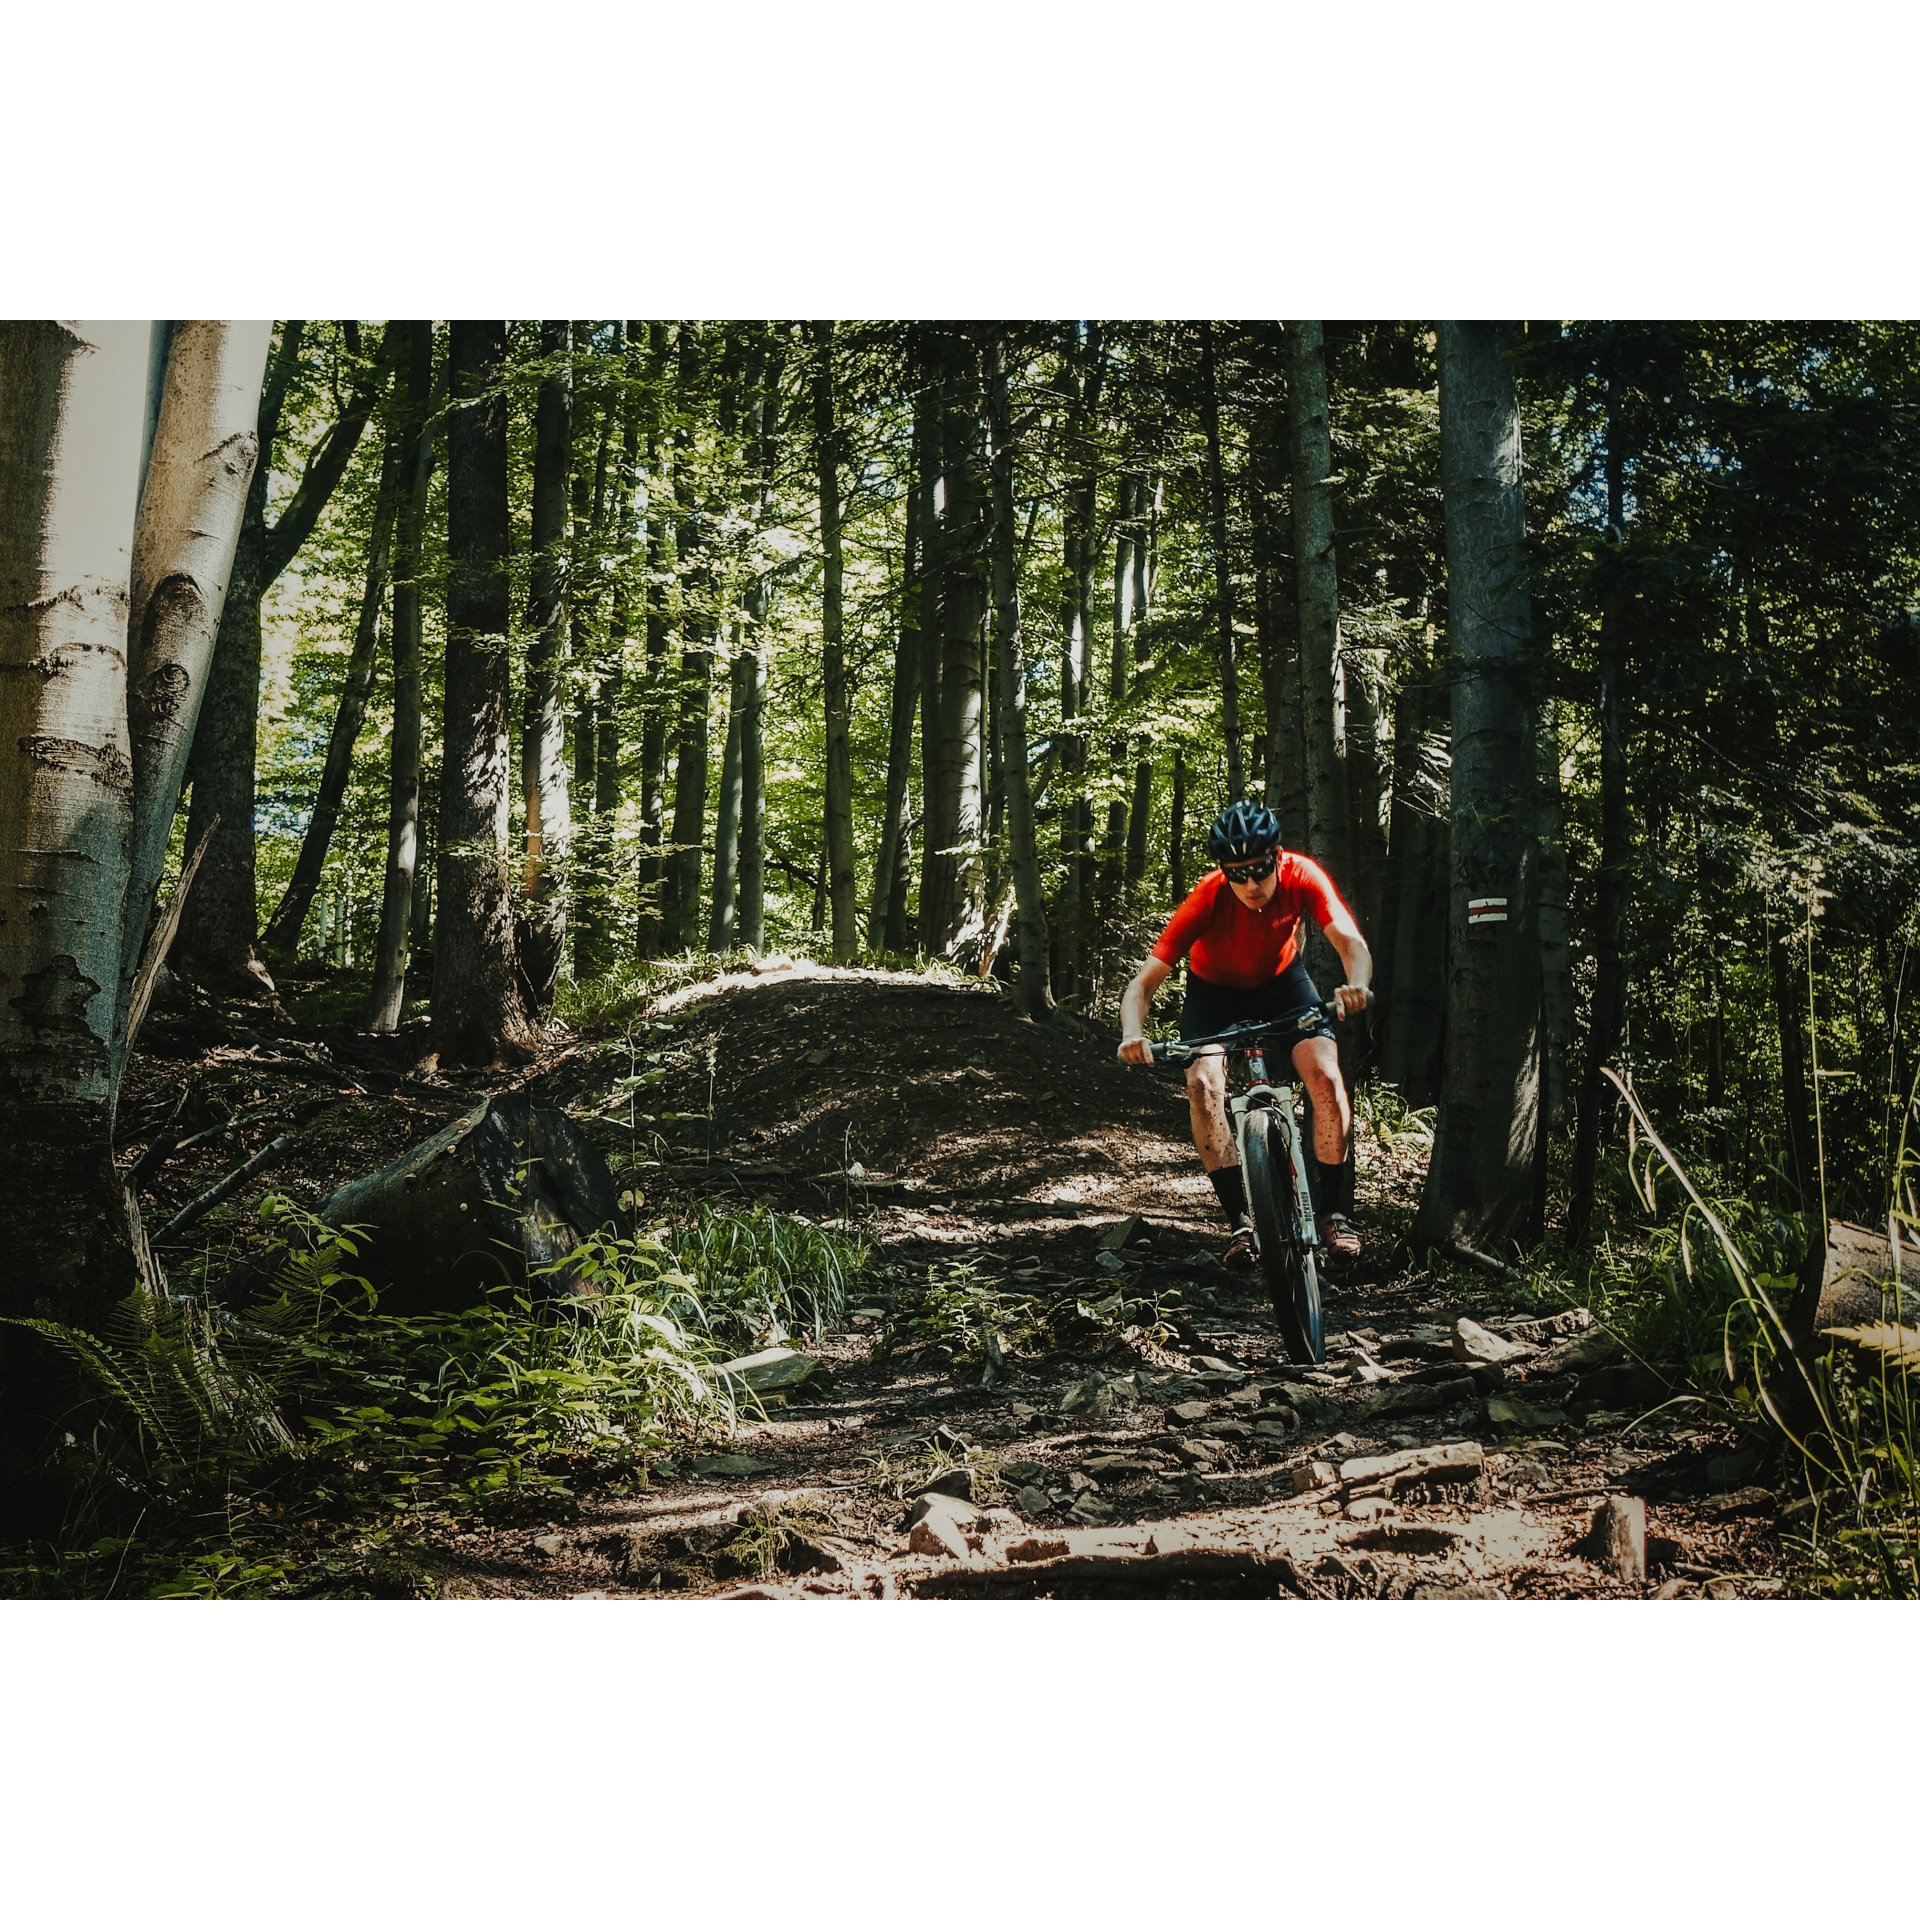 A cyclist in a red and black outfit riding in the middle of the forest on rocky hills